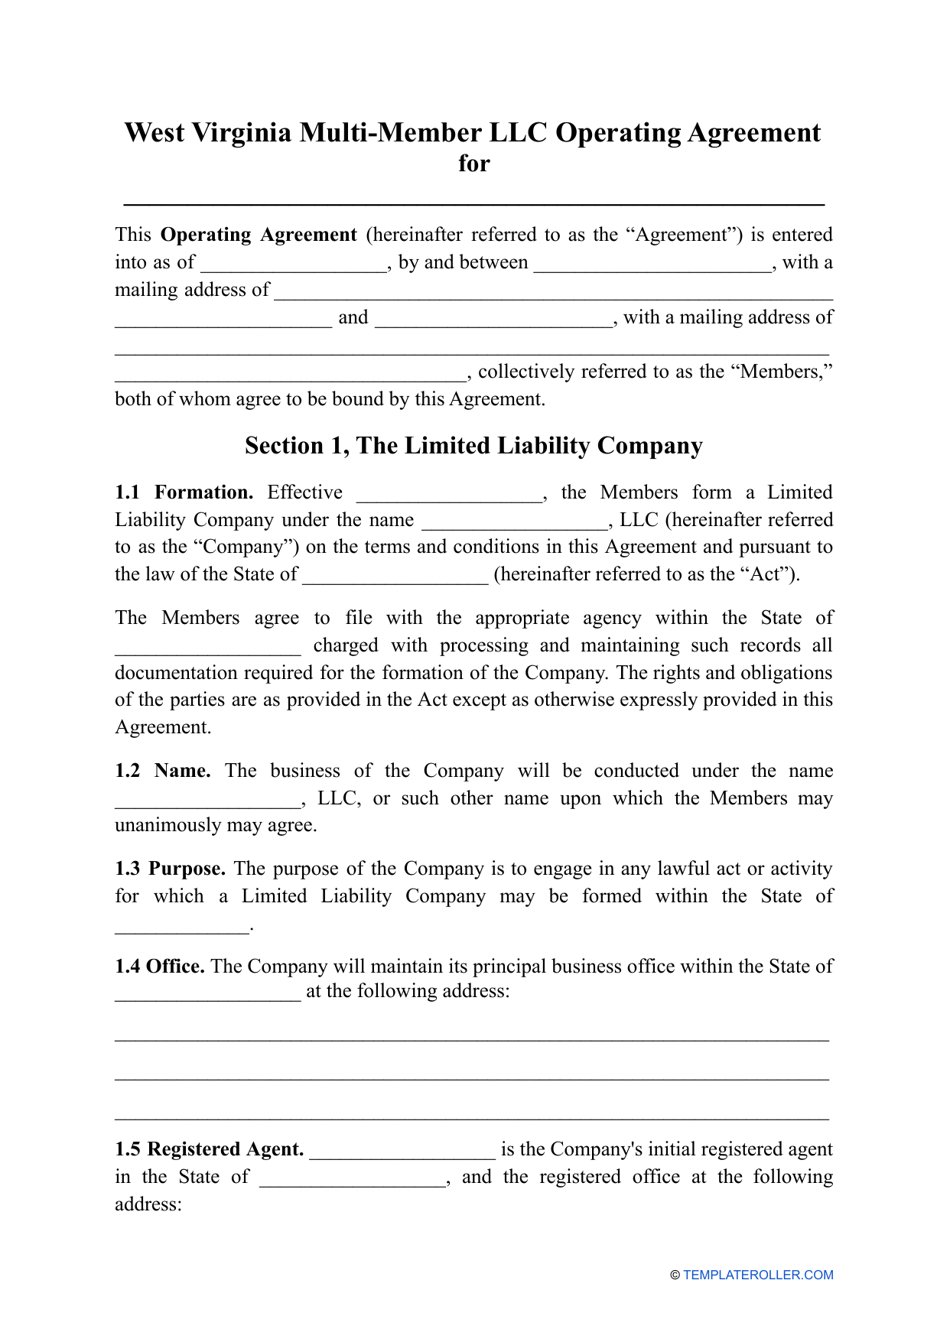 Multi-Member LLC Operating Agreement Template - West Virginia, Page 1